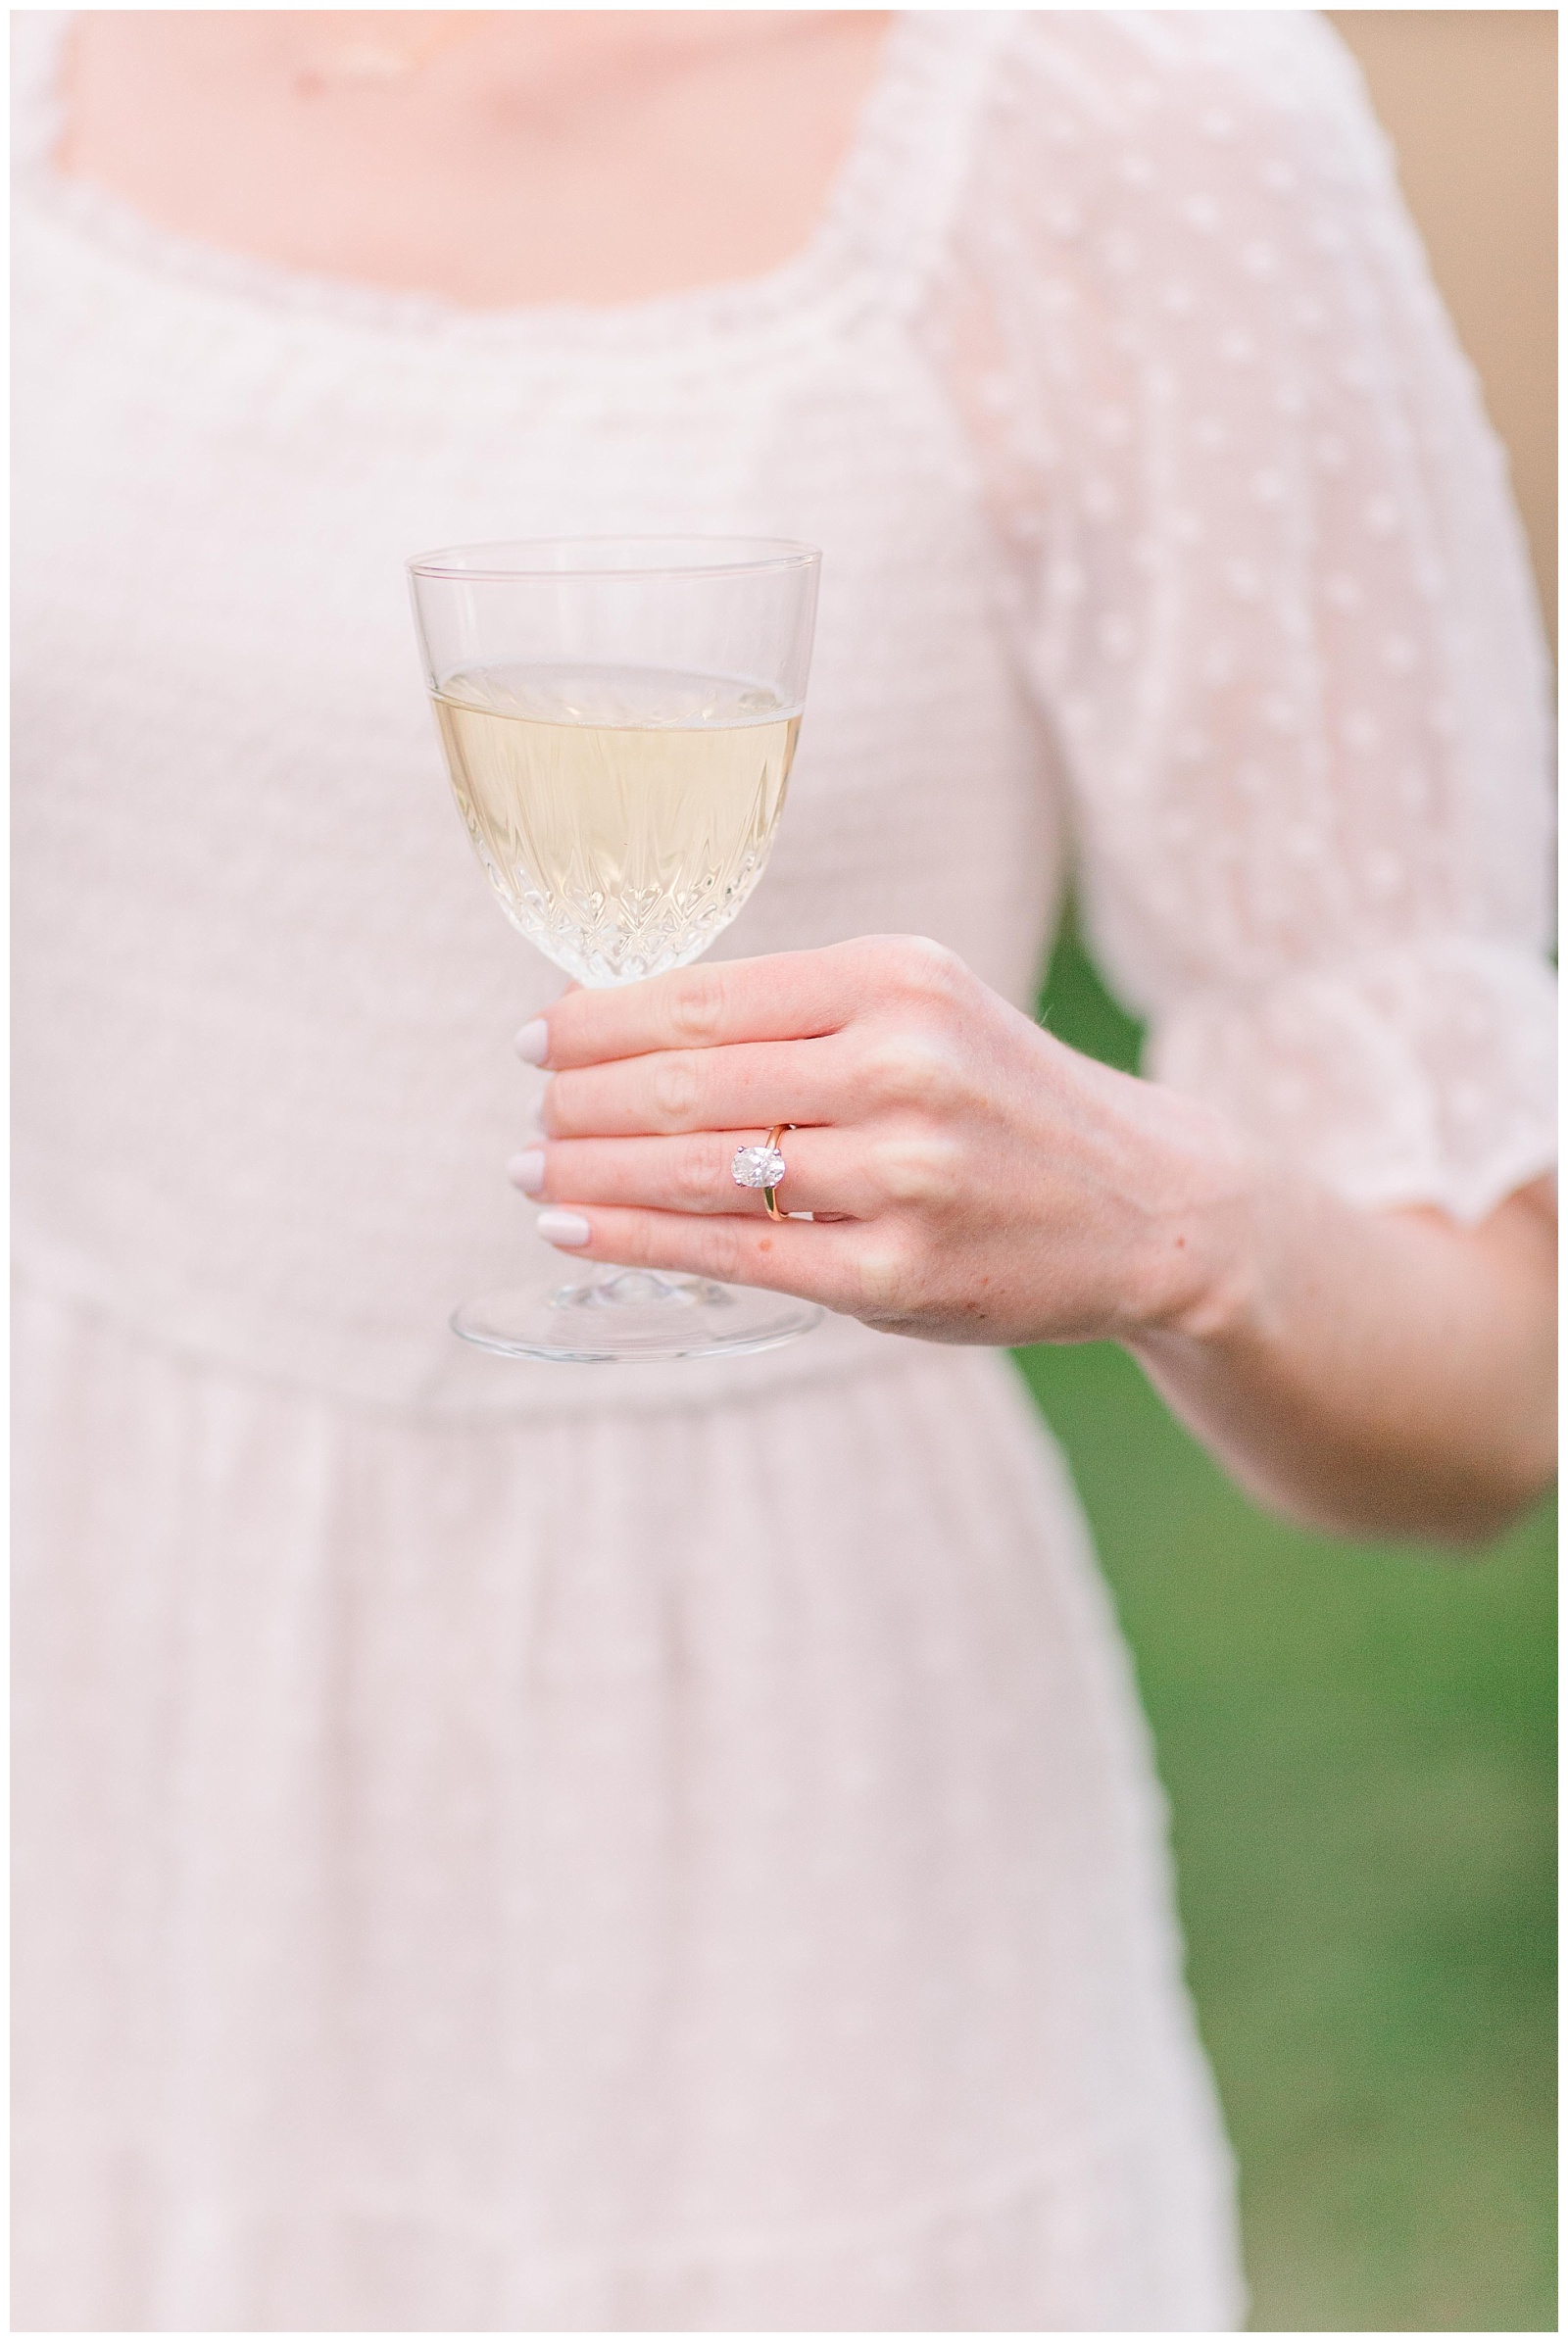 Engagement ring and champagne flute 